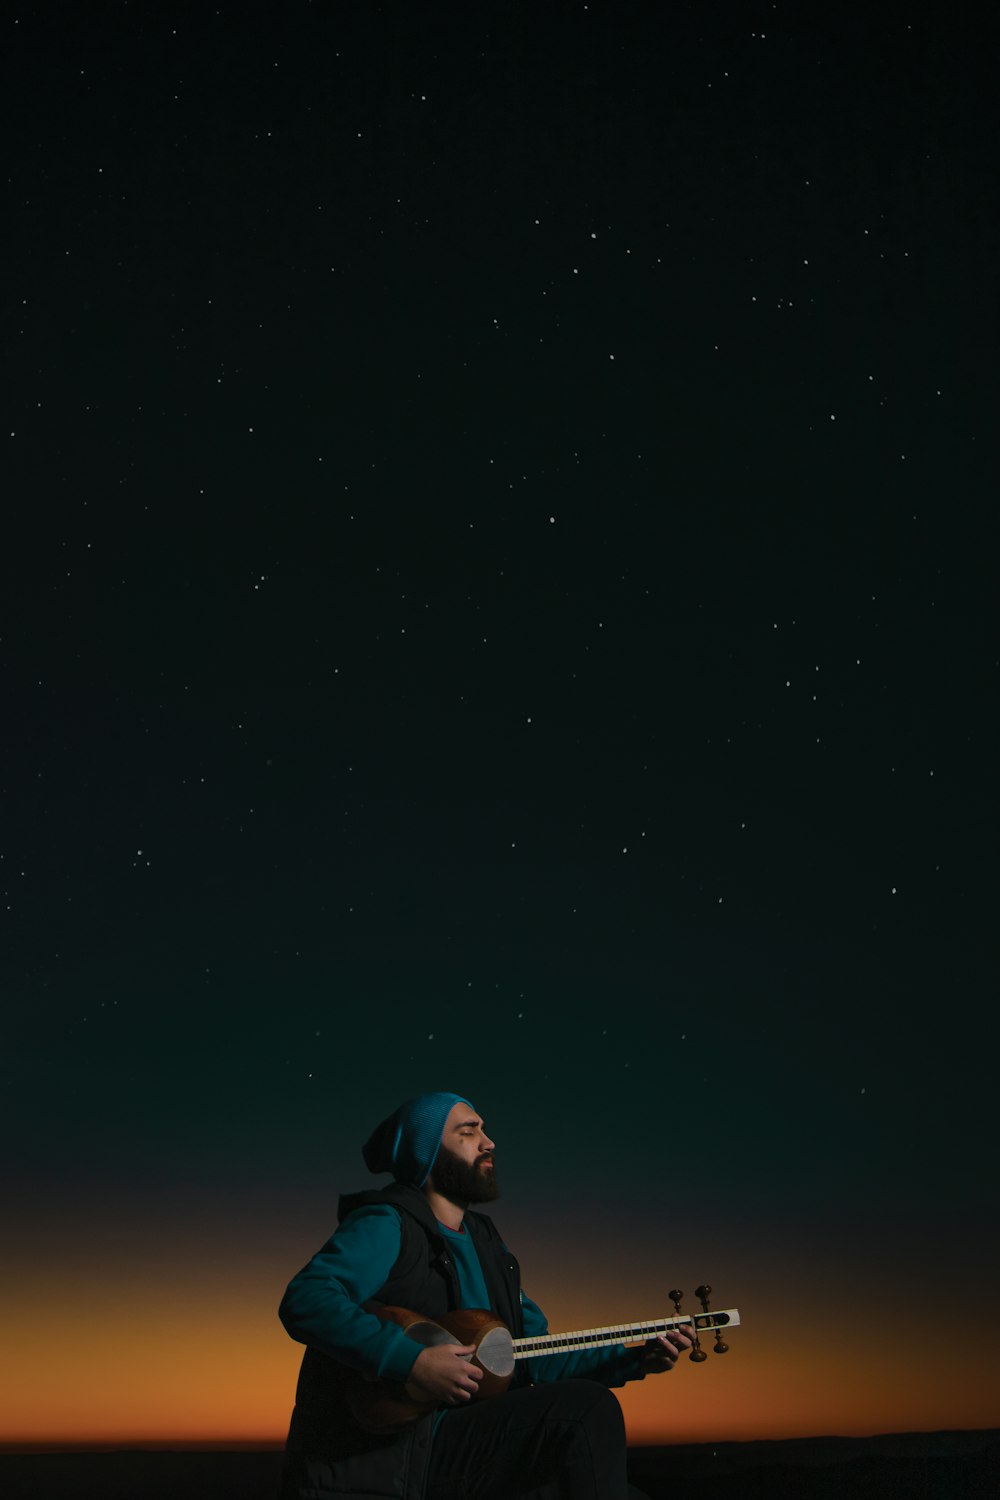 a man sitting on top of a rock under a night sky